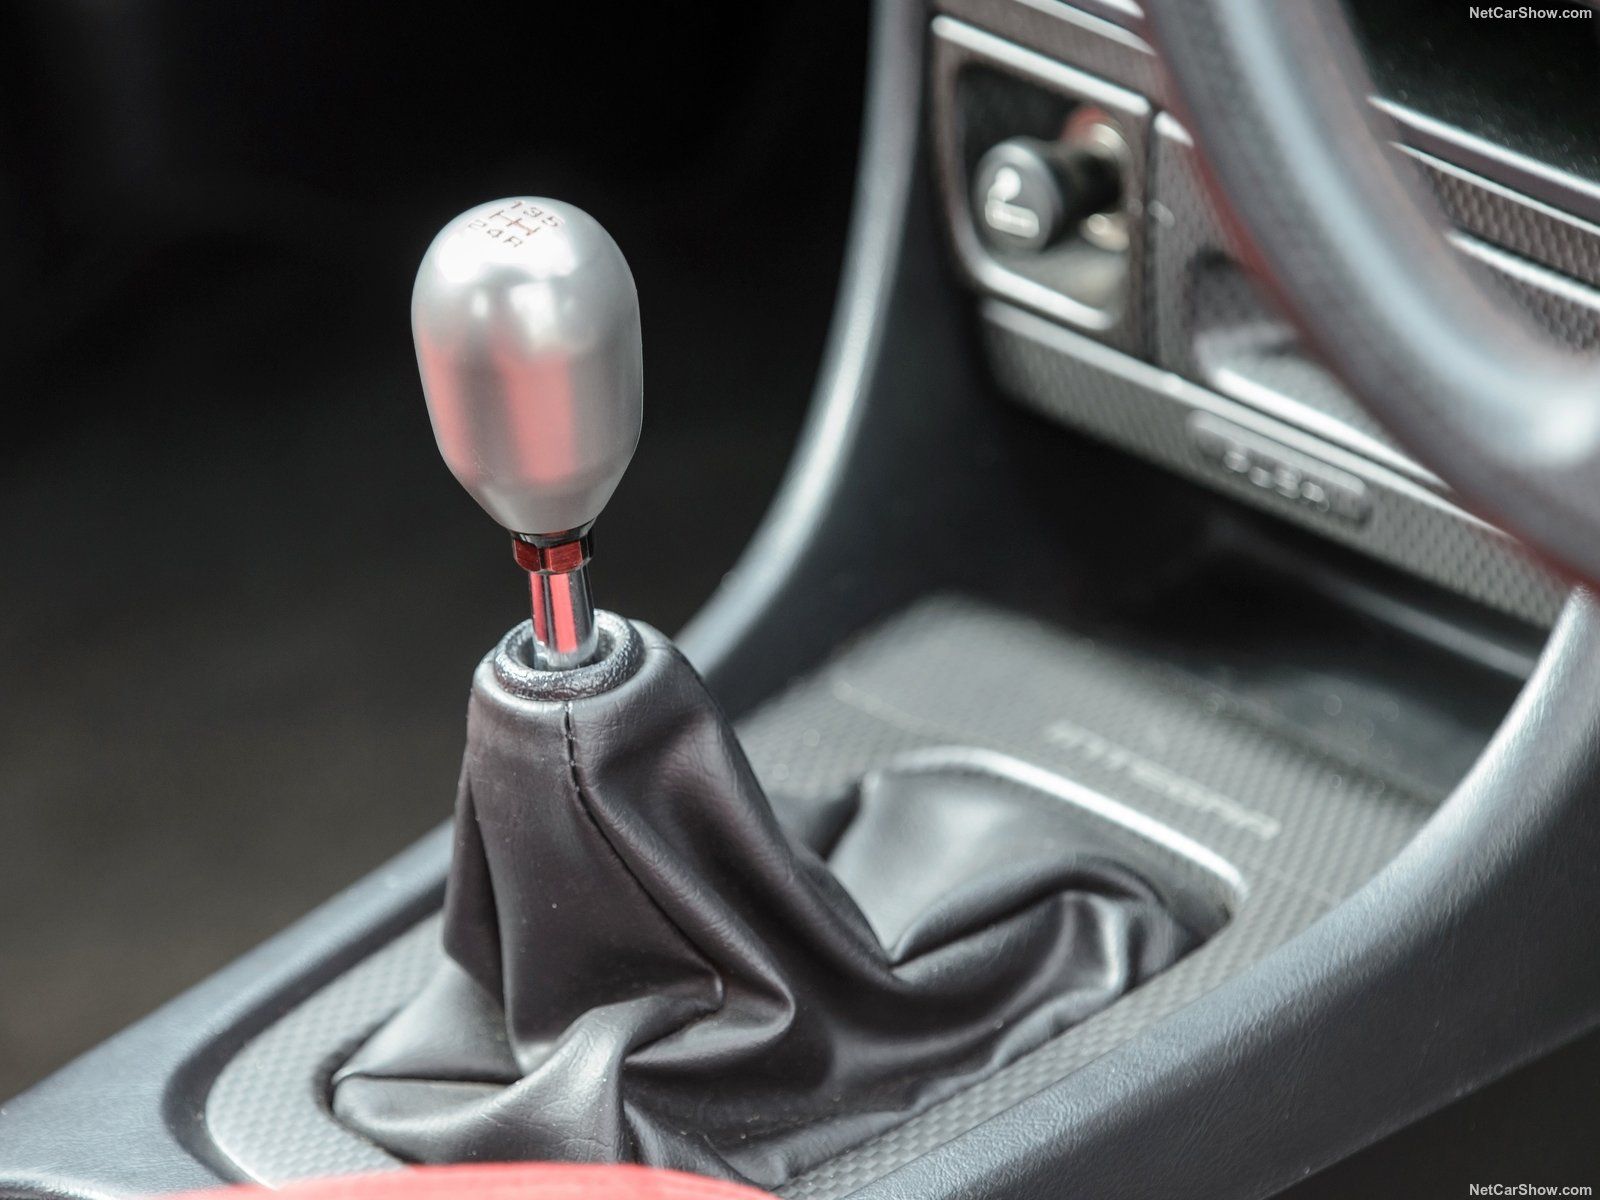 Acura Integra gear stick, view of gear level and instruments close up